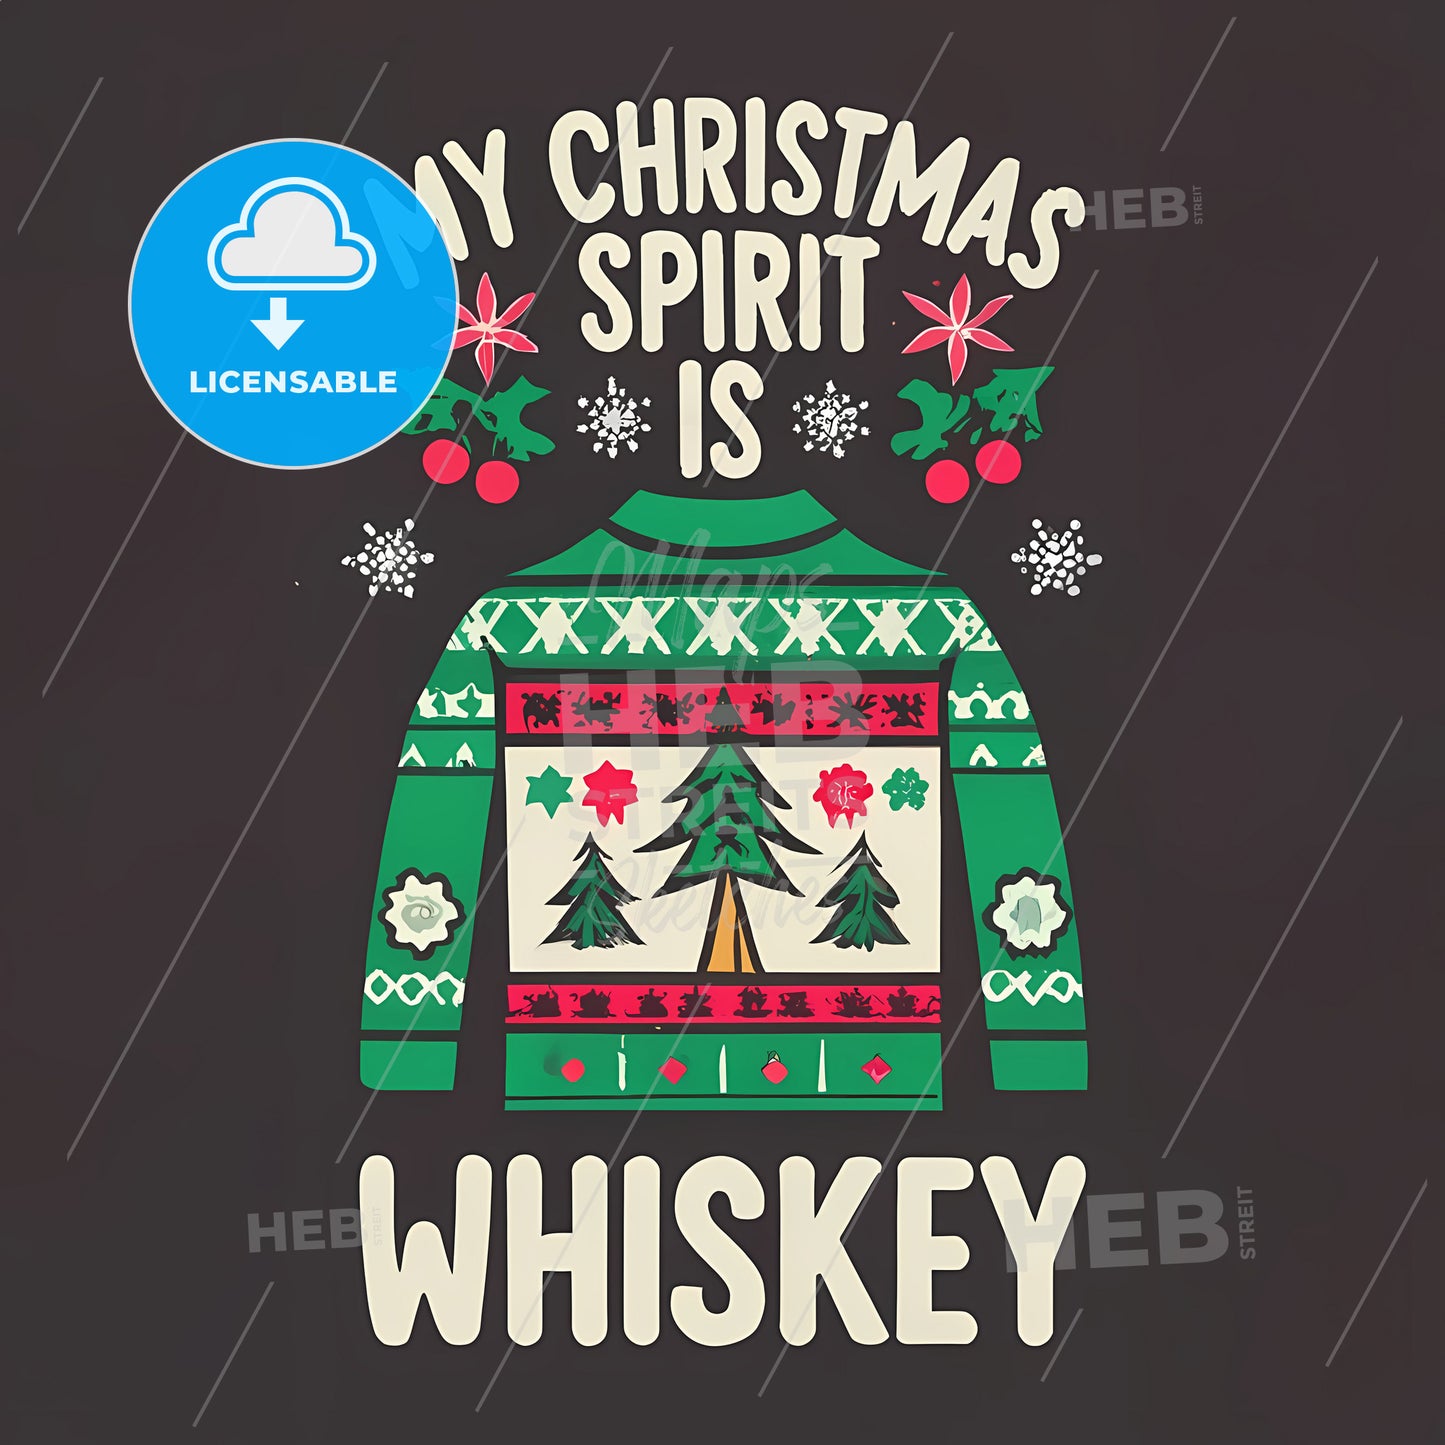 My Christmas Spirit Is Whiskey - A Graphic Of A Sweater With A Christmas Tree And Text